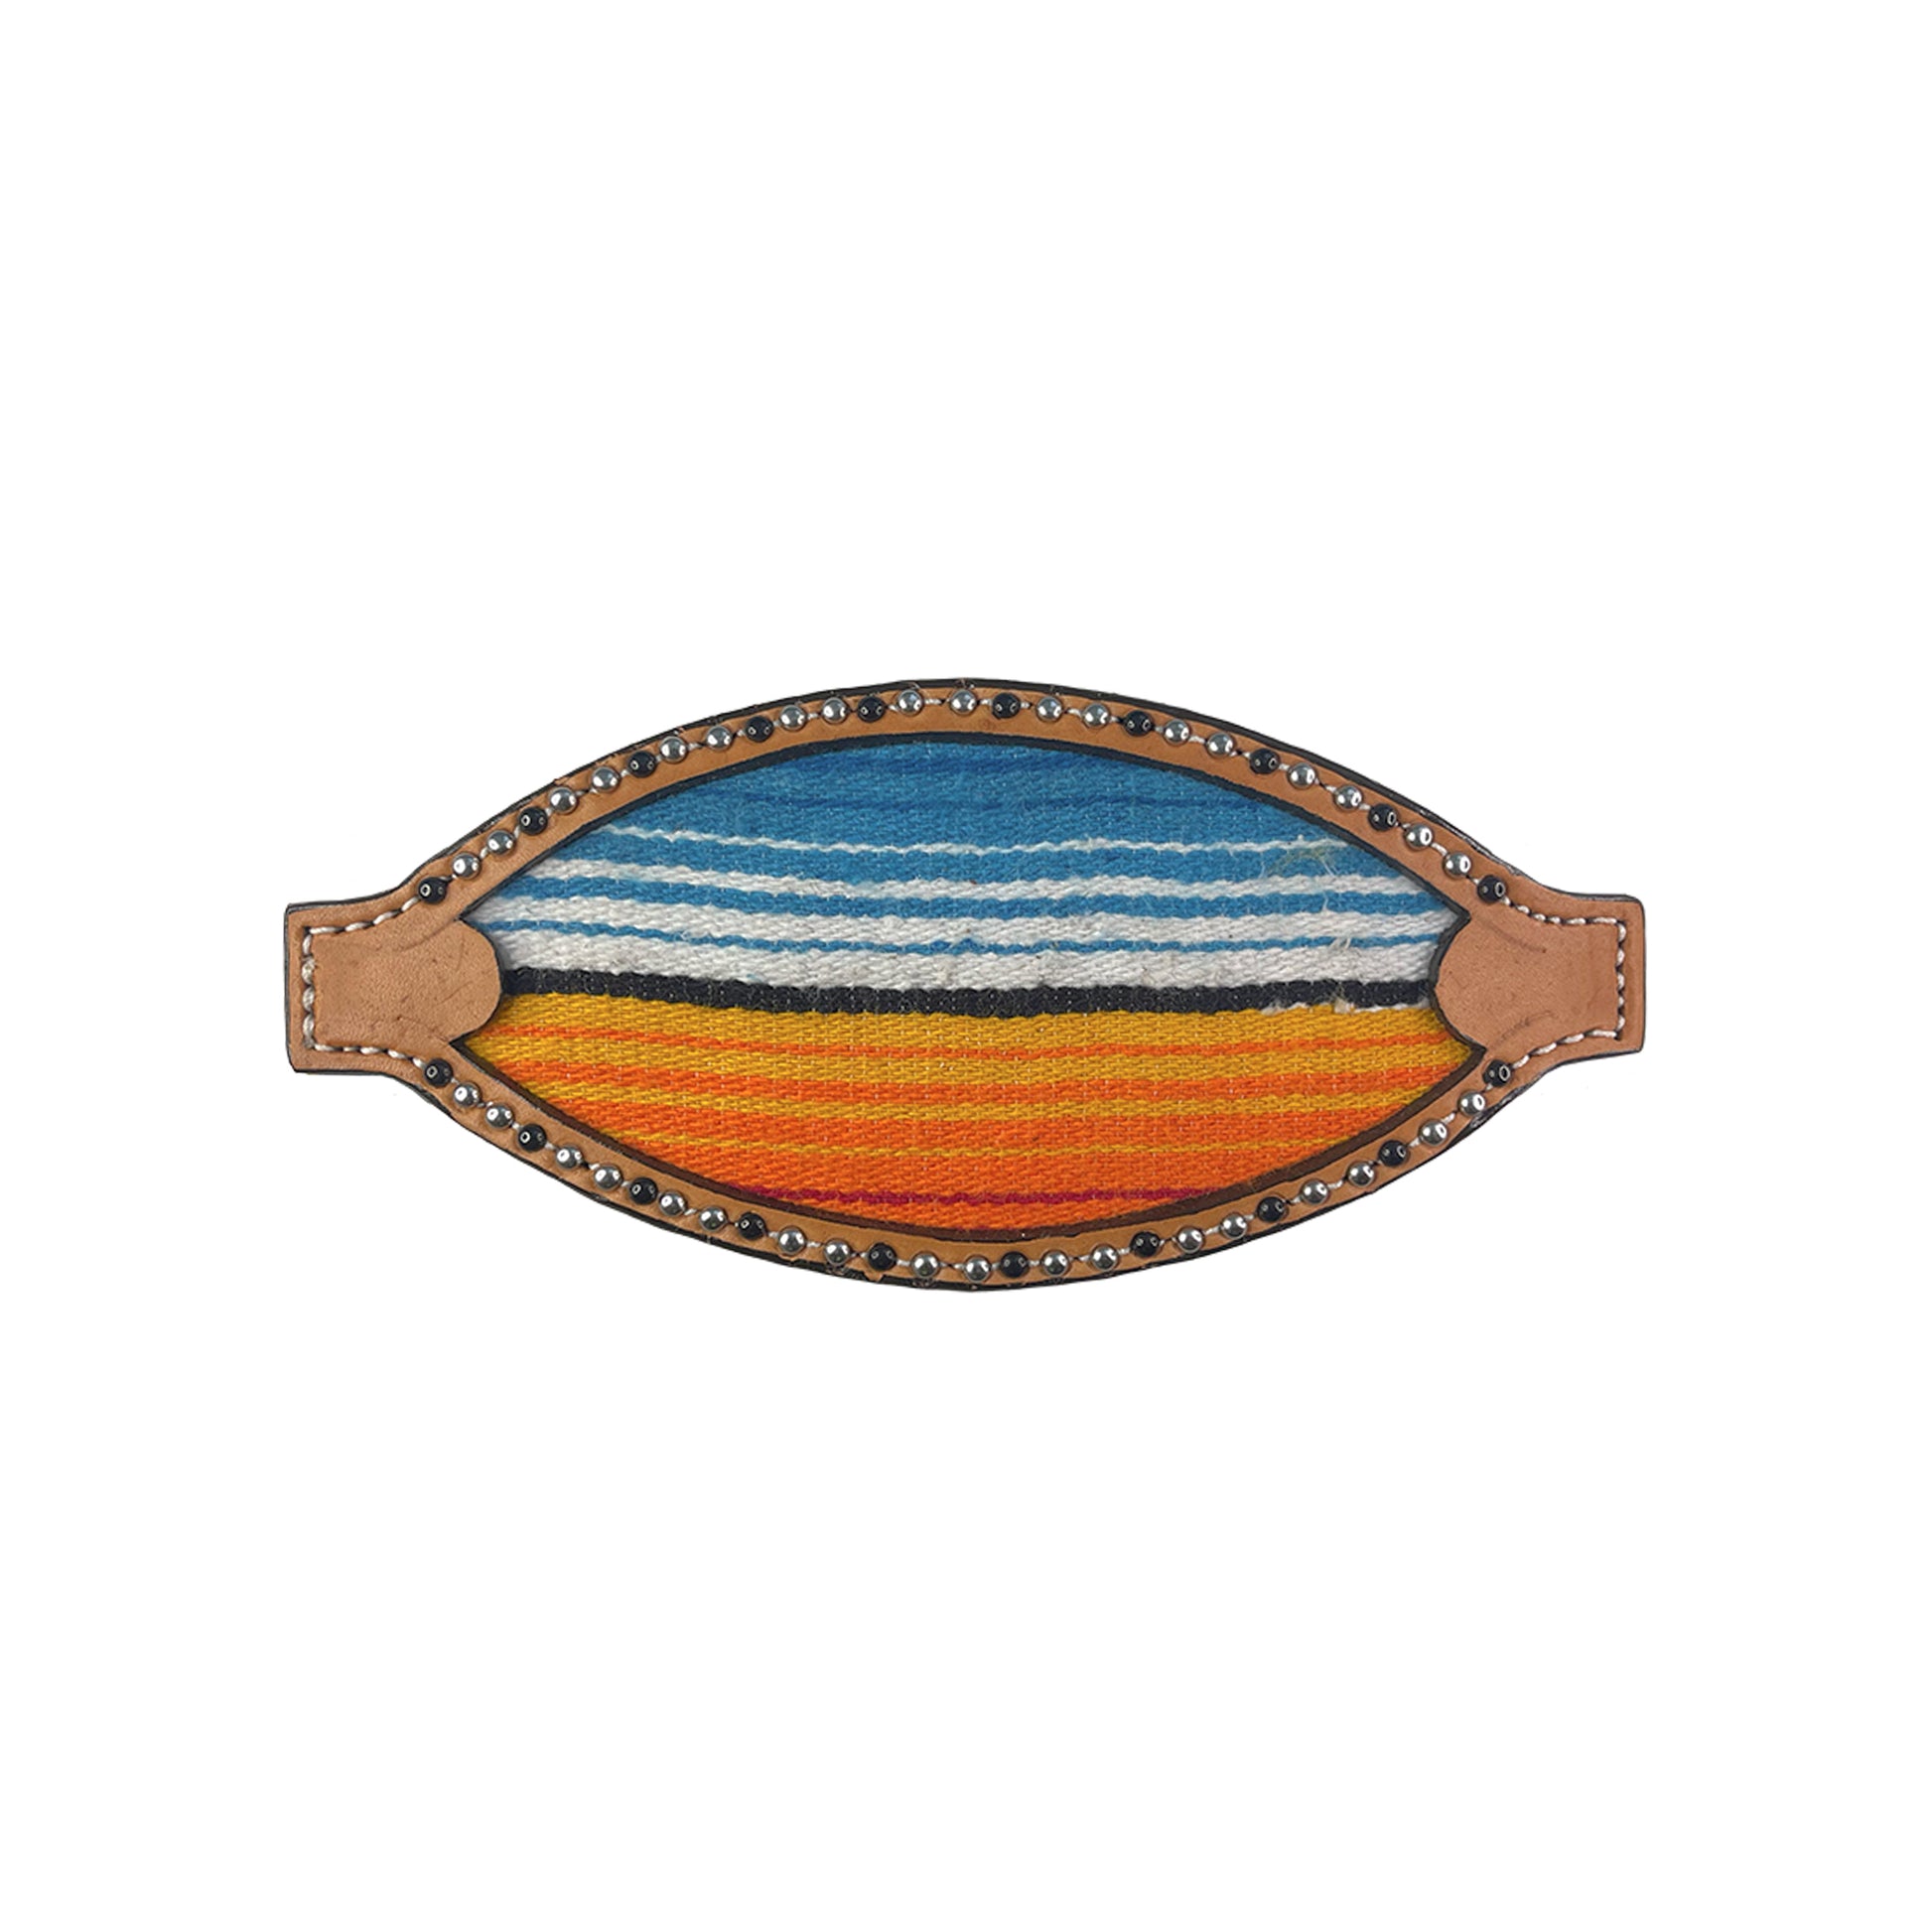 Bronc nose golden leather serape inlay with black and SS spots (serape color may vary).